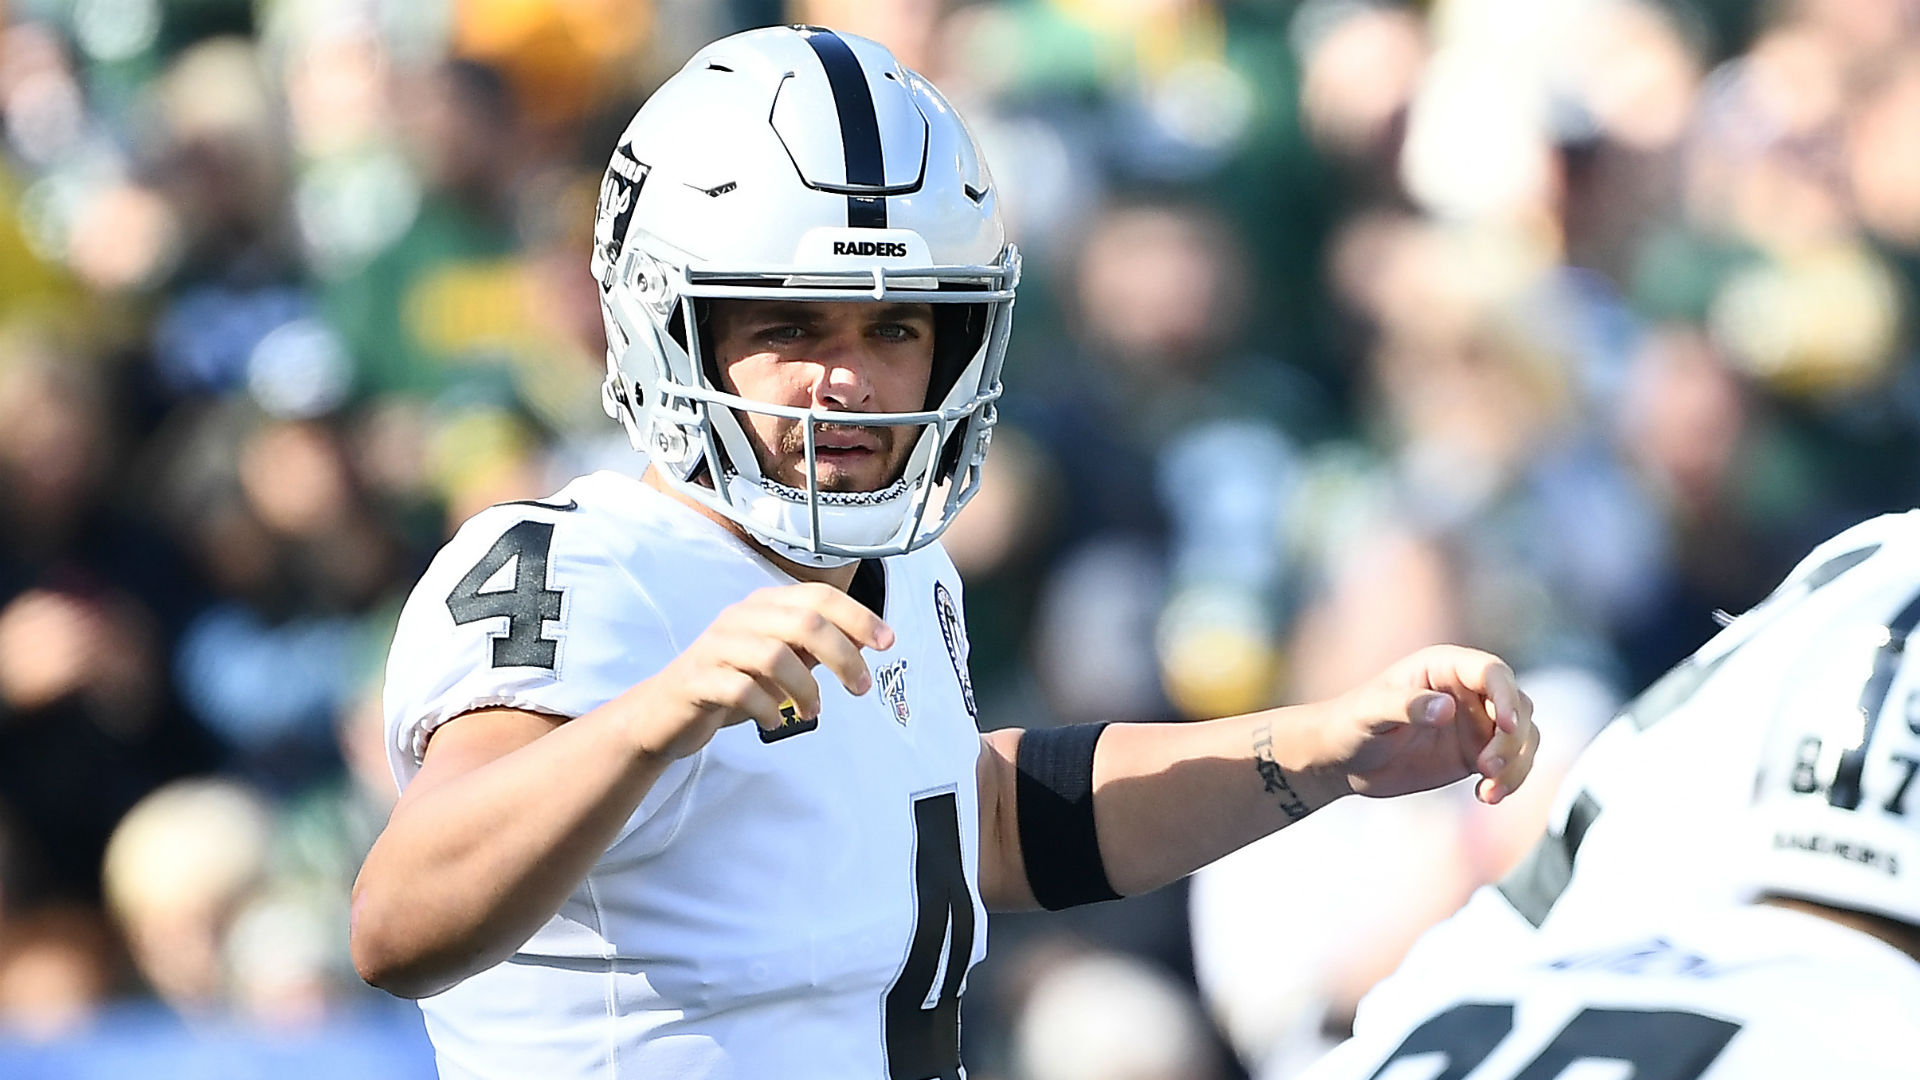 Raiders' Derek Carr fumbles for touchback again, learns nothing from